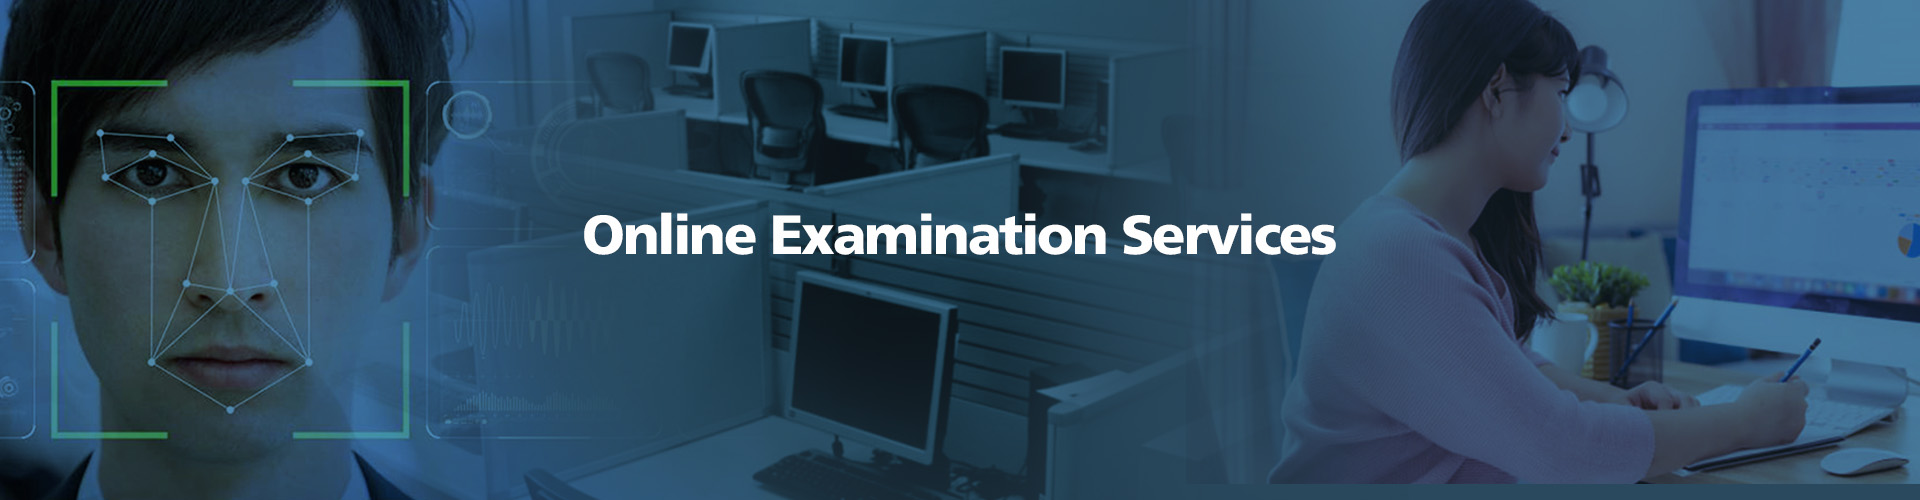 Online Examination Services from Sensabyte Technologies